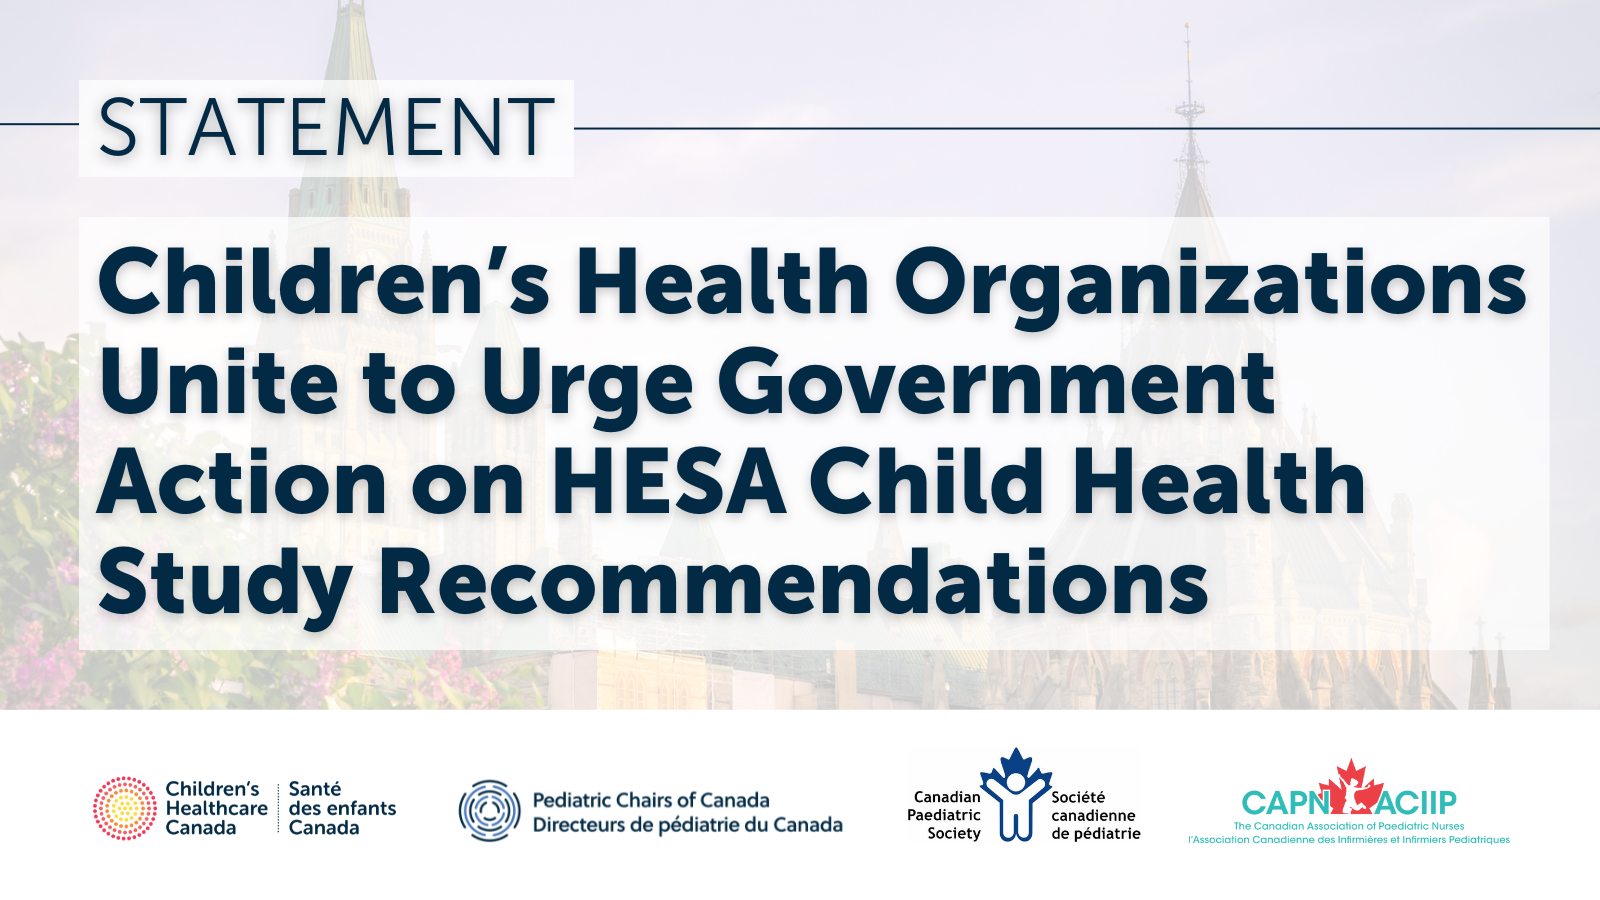 Children's Healthcare Canada Statement graphic on Children’s Health Organizations Unite to Urge Government Action on HESA Child Health Study Recommendations 